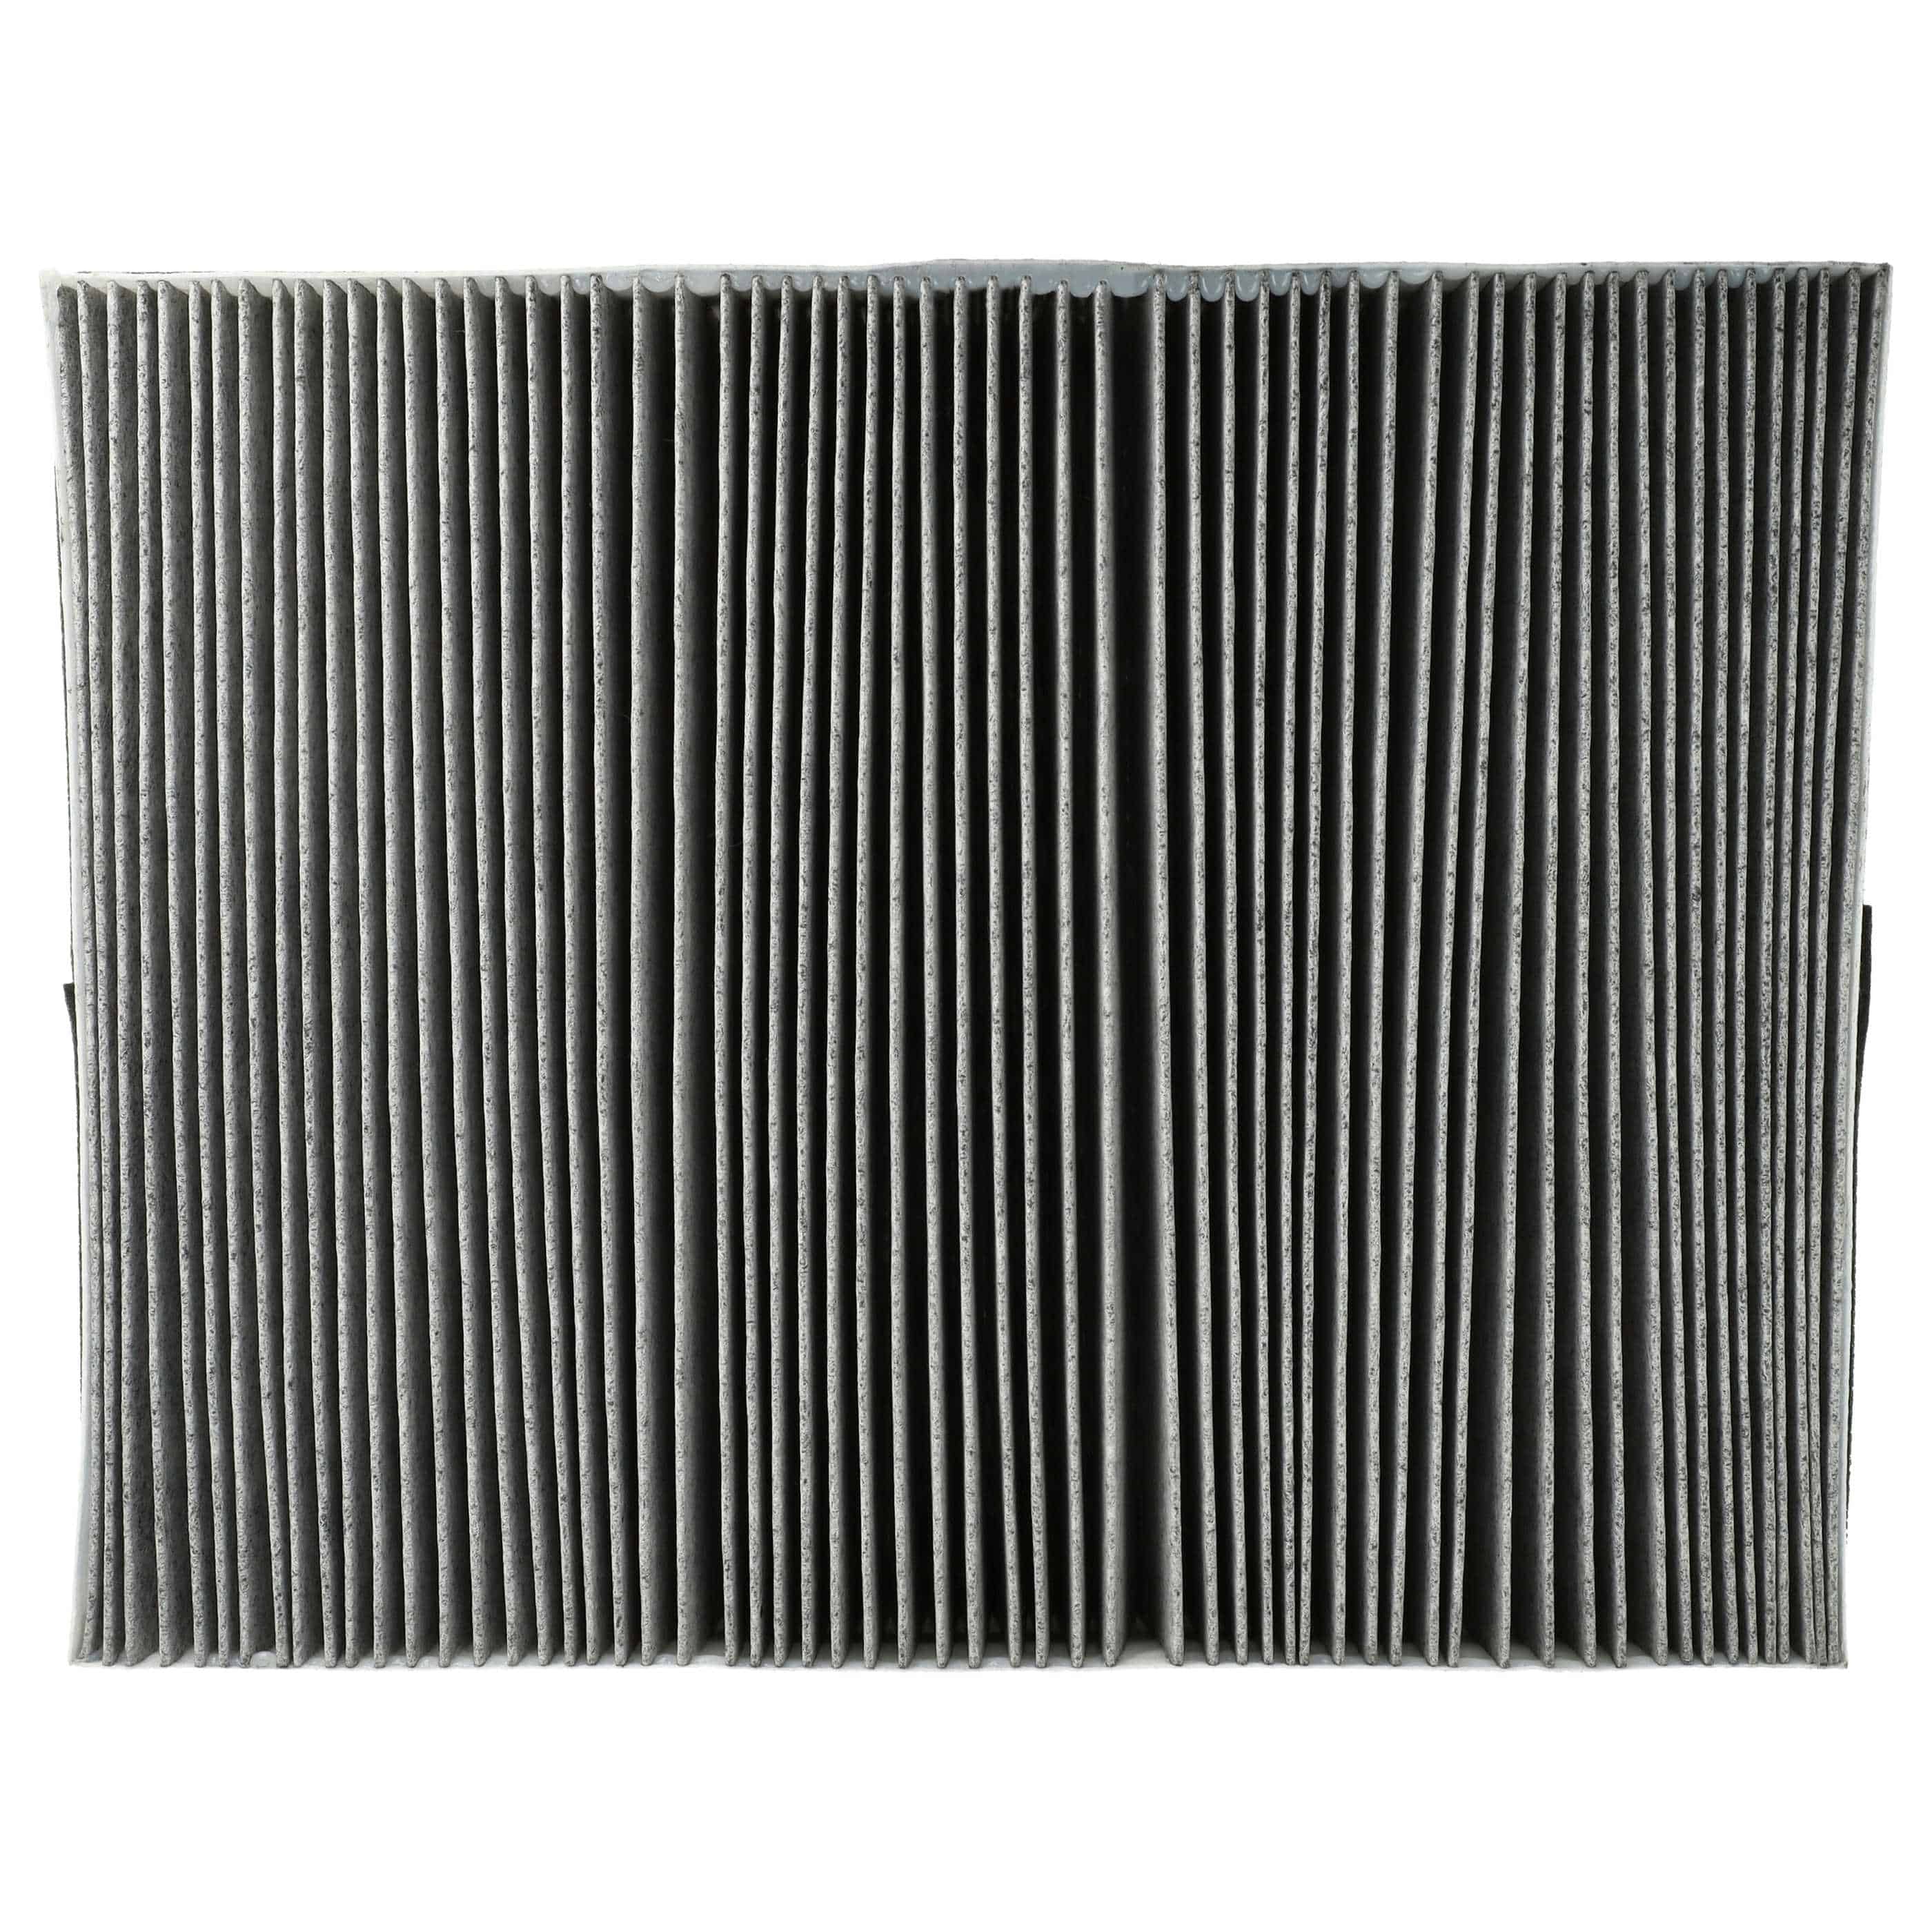 Filter as Replacement for Philips AC4147/10 - HEPA + Activated Carbon, 36 x 28 x 4.5 cm